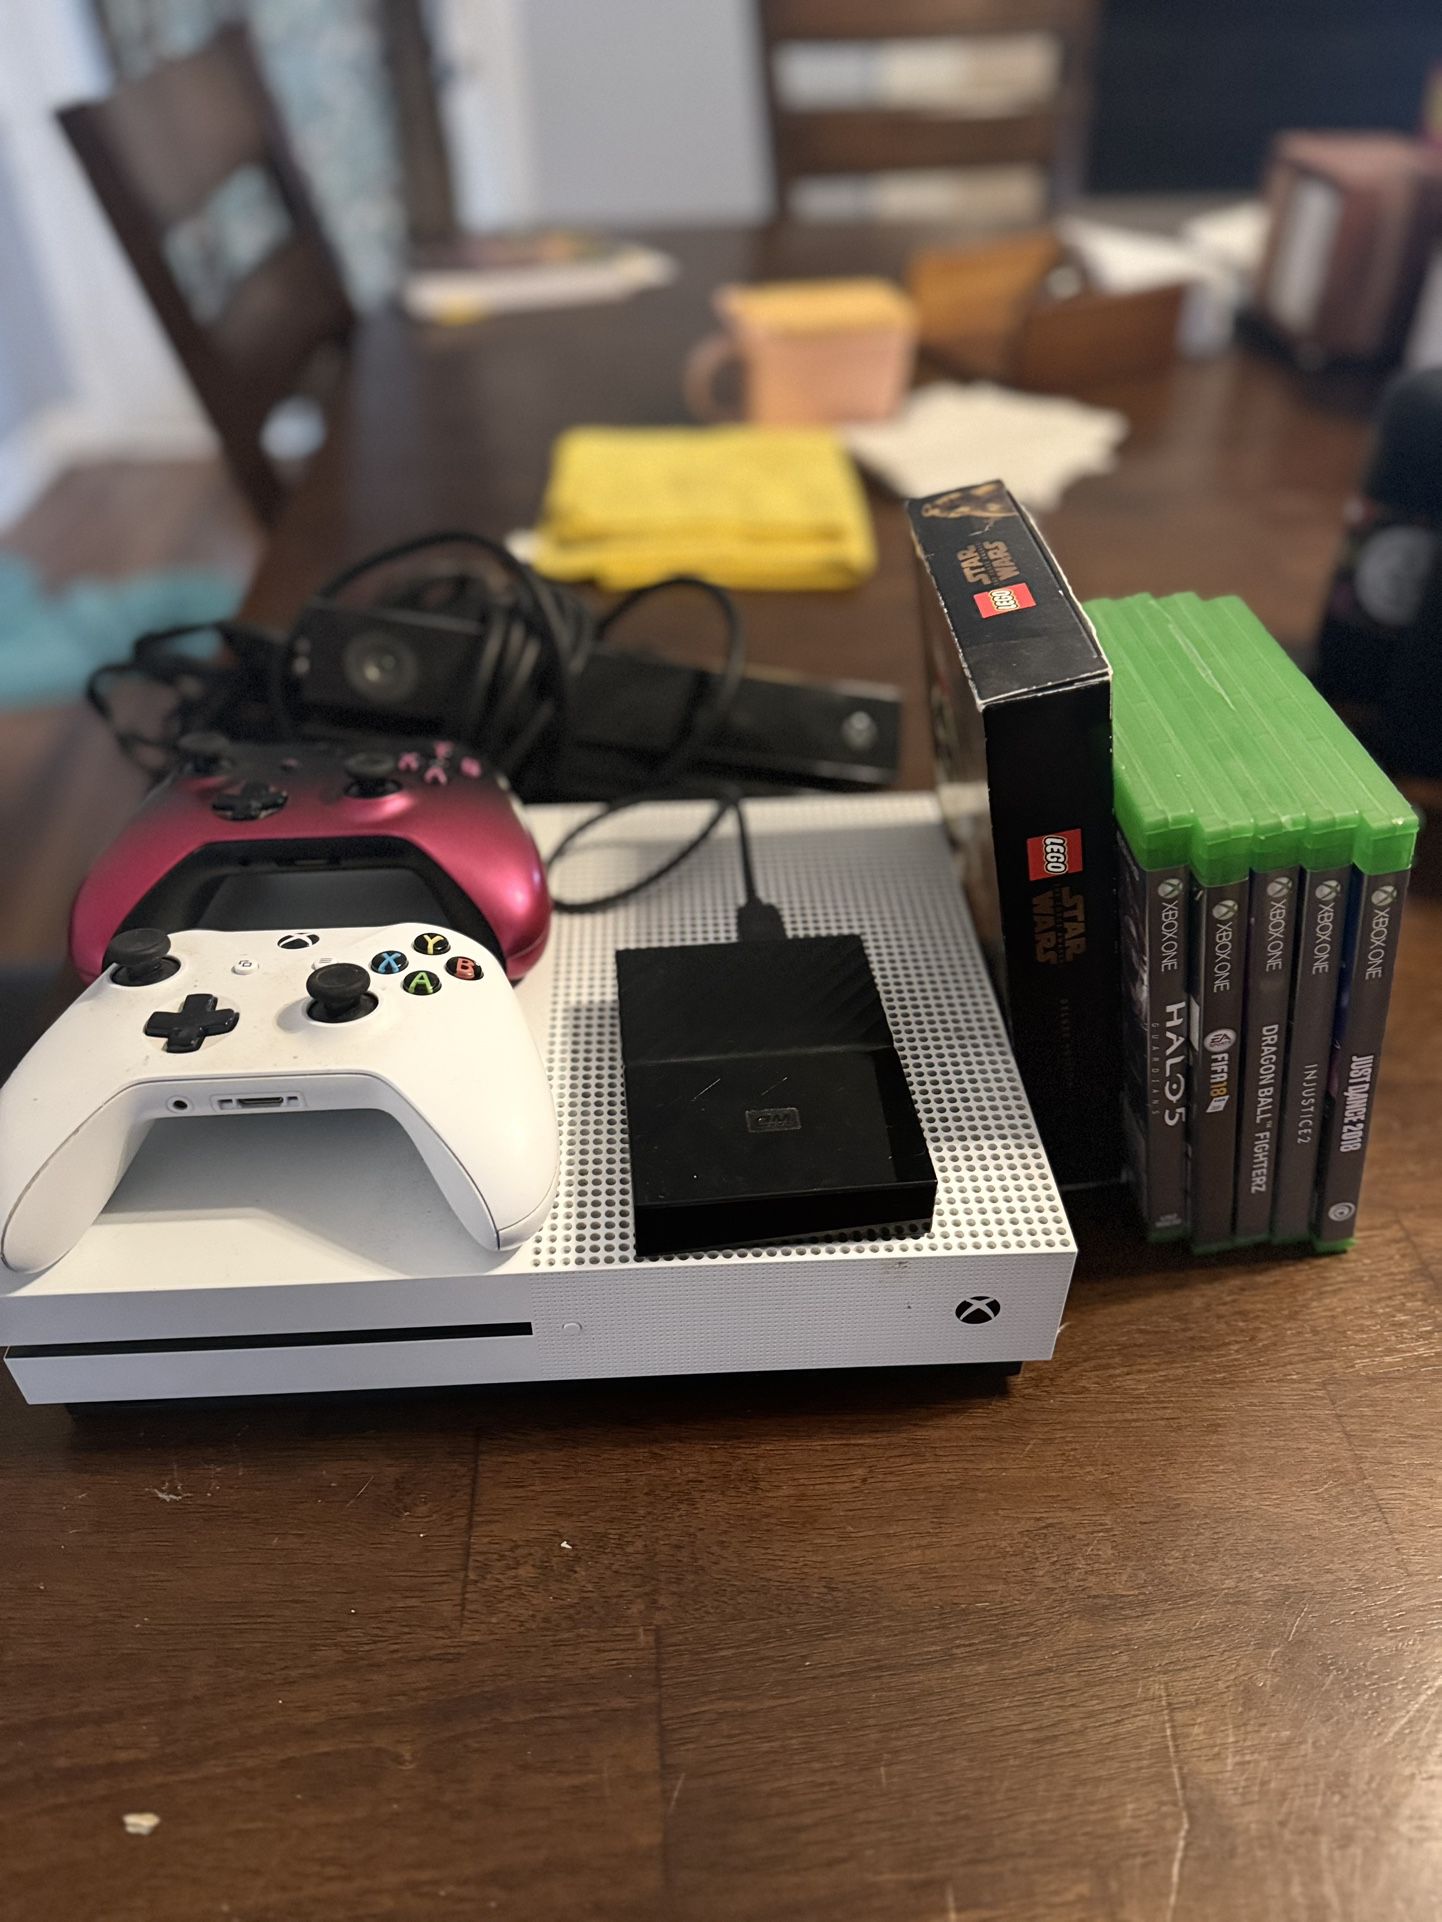 Xbox One S / Kinect / 1TB My Passport / 2 Controller 